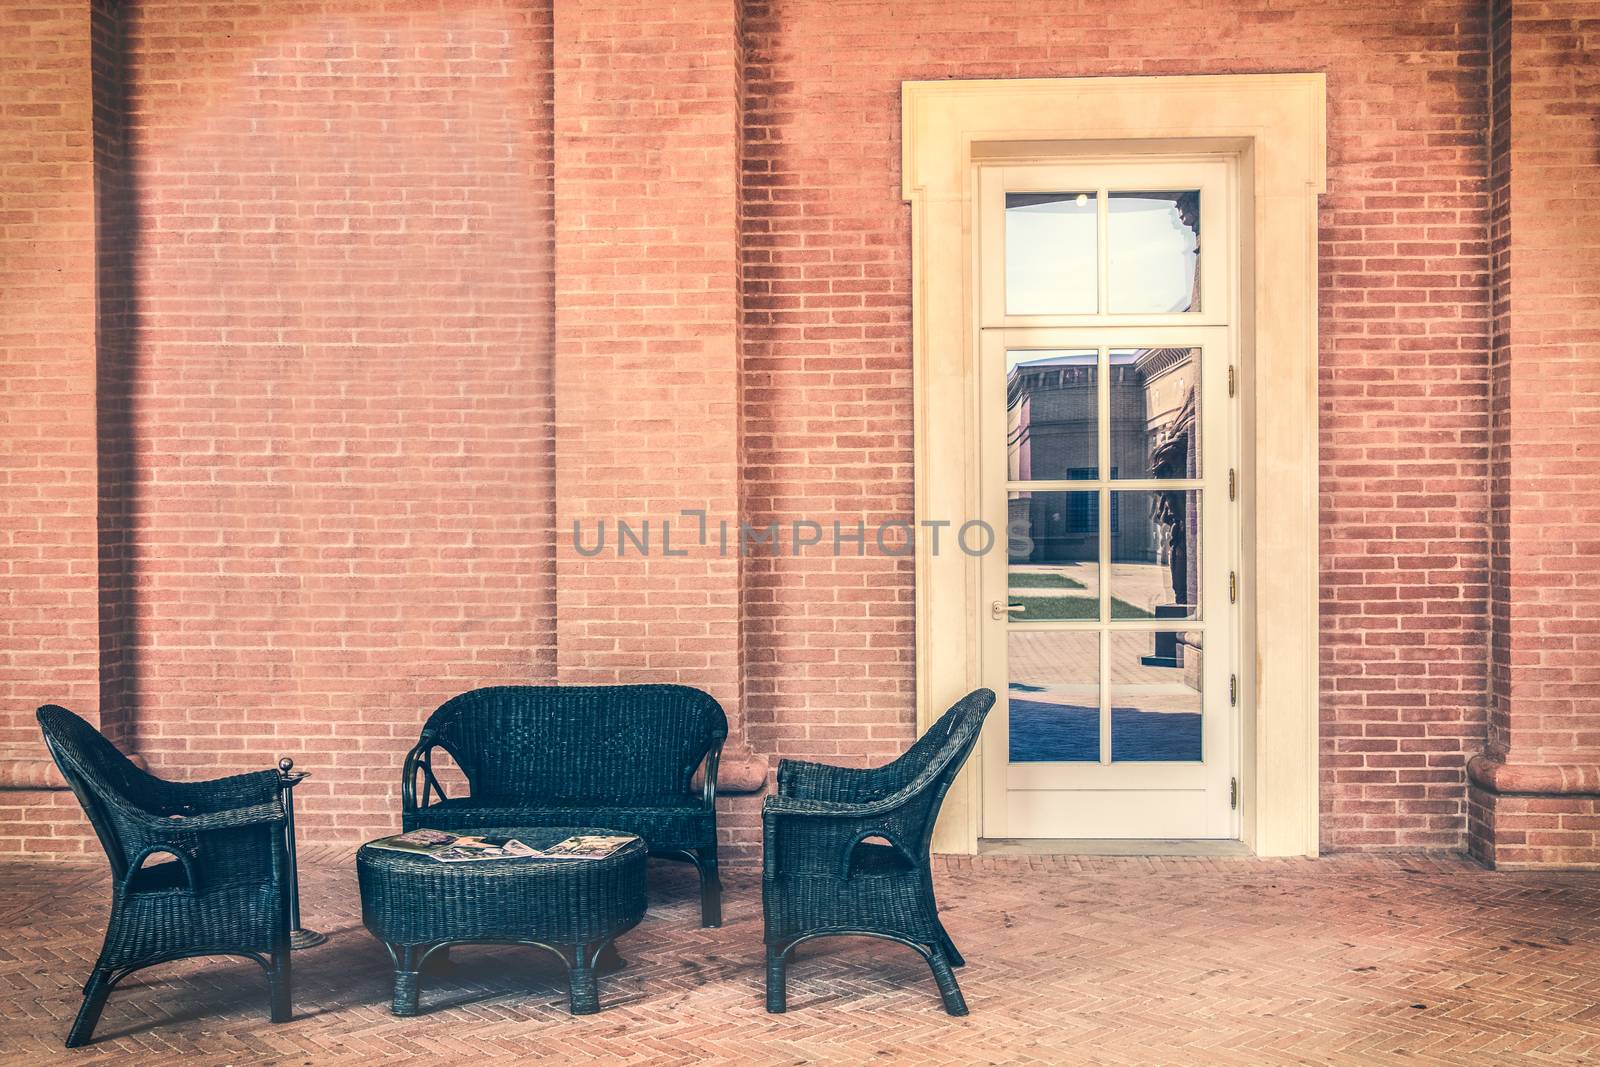 waiting room outside modern elegant with table magazines wooden armchairs stone walls and white door .